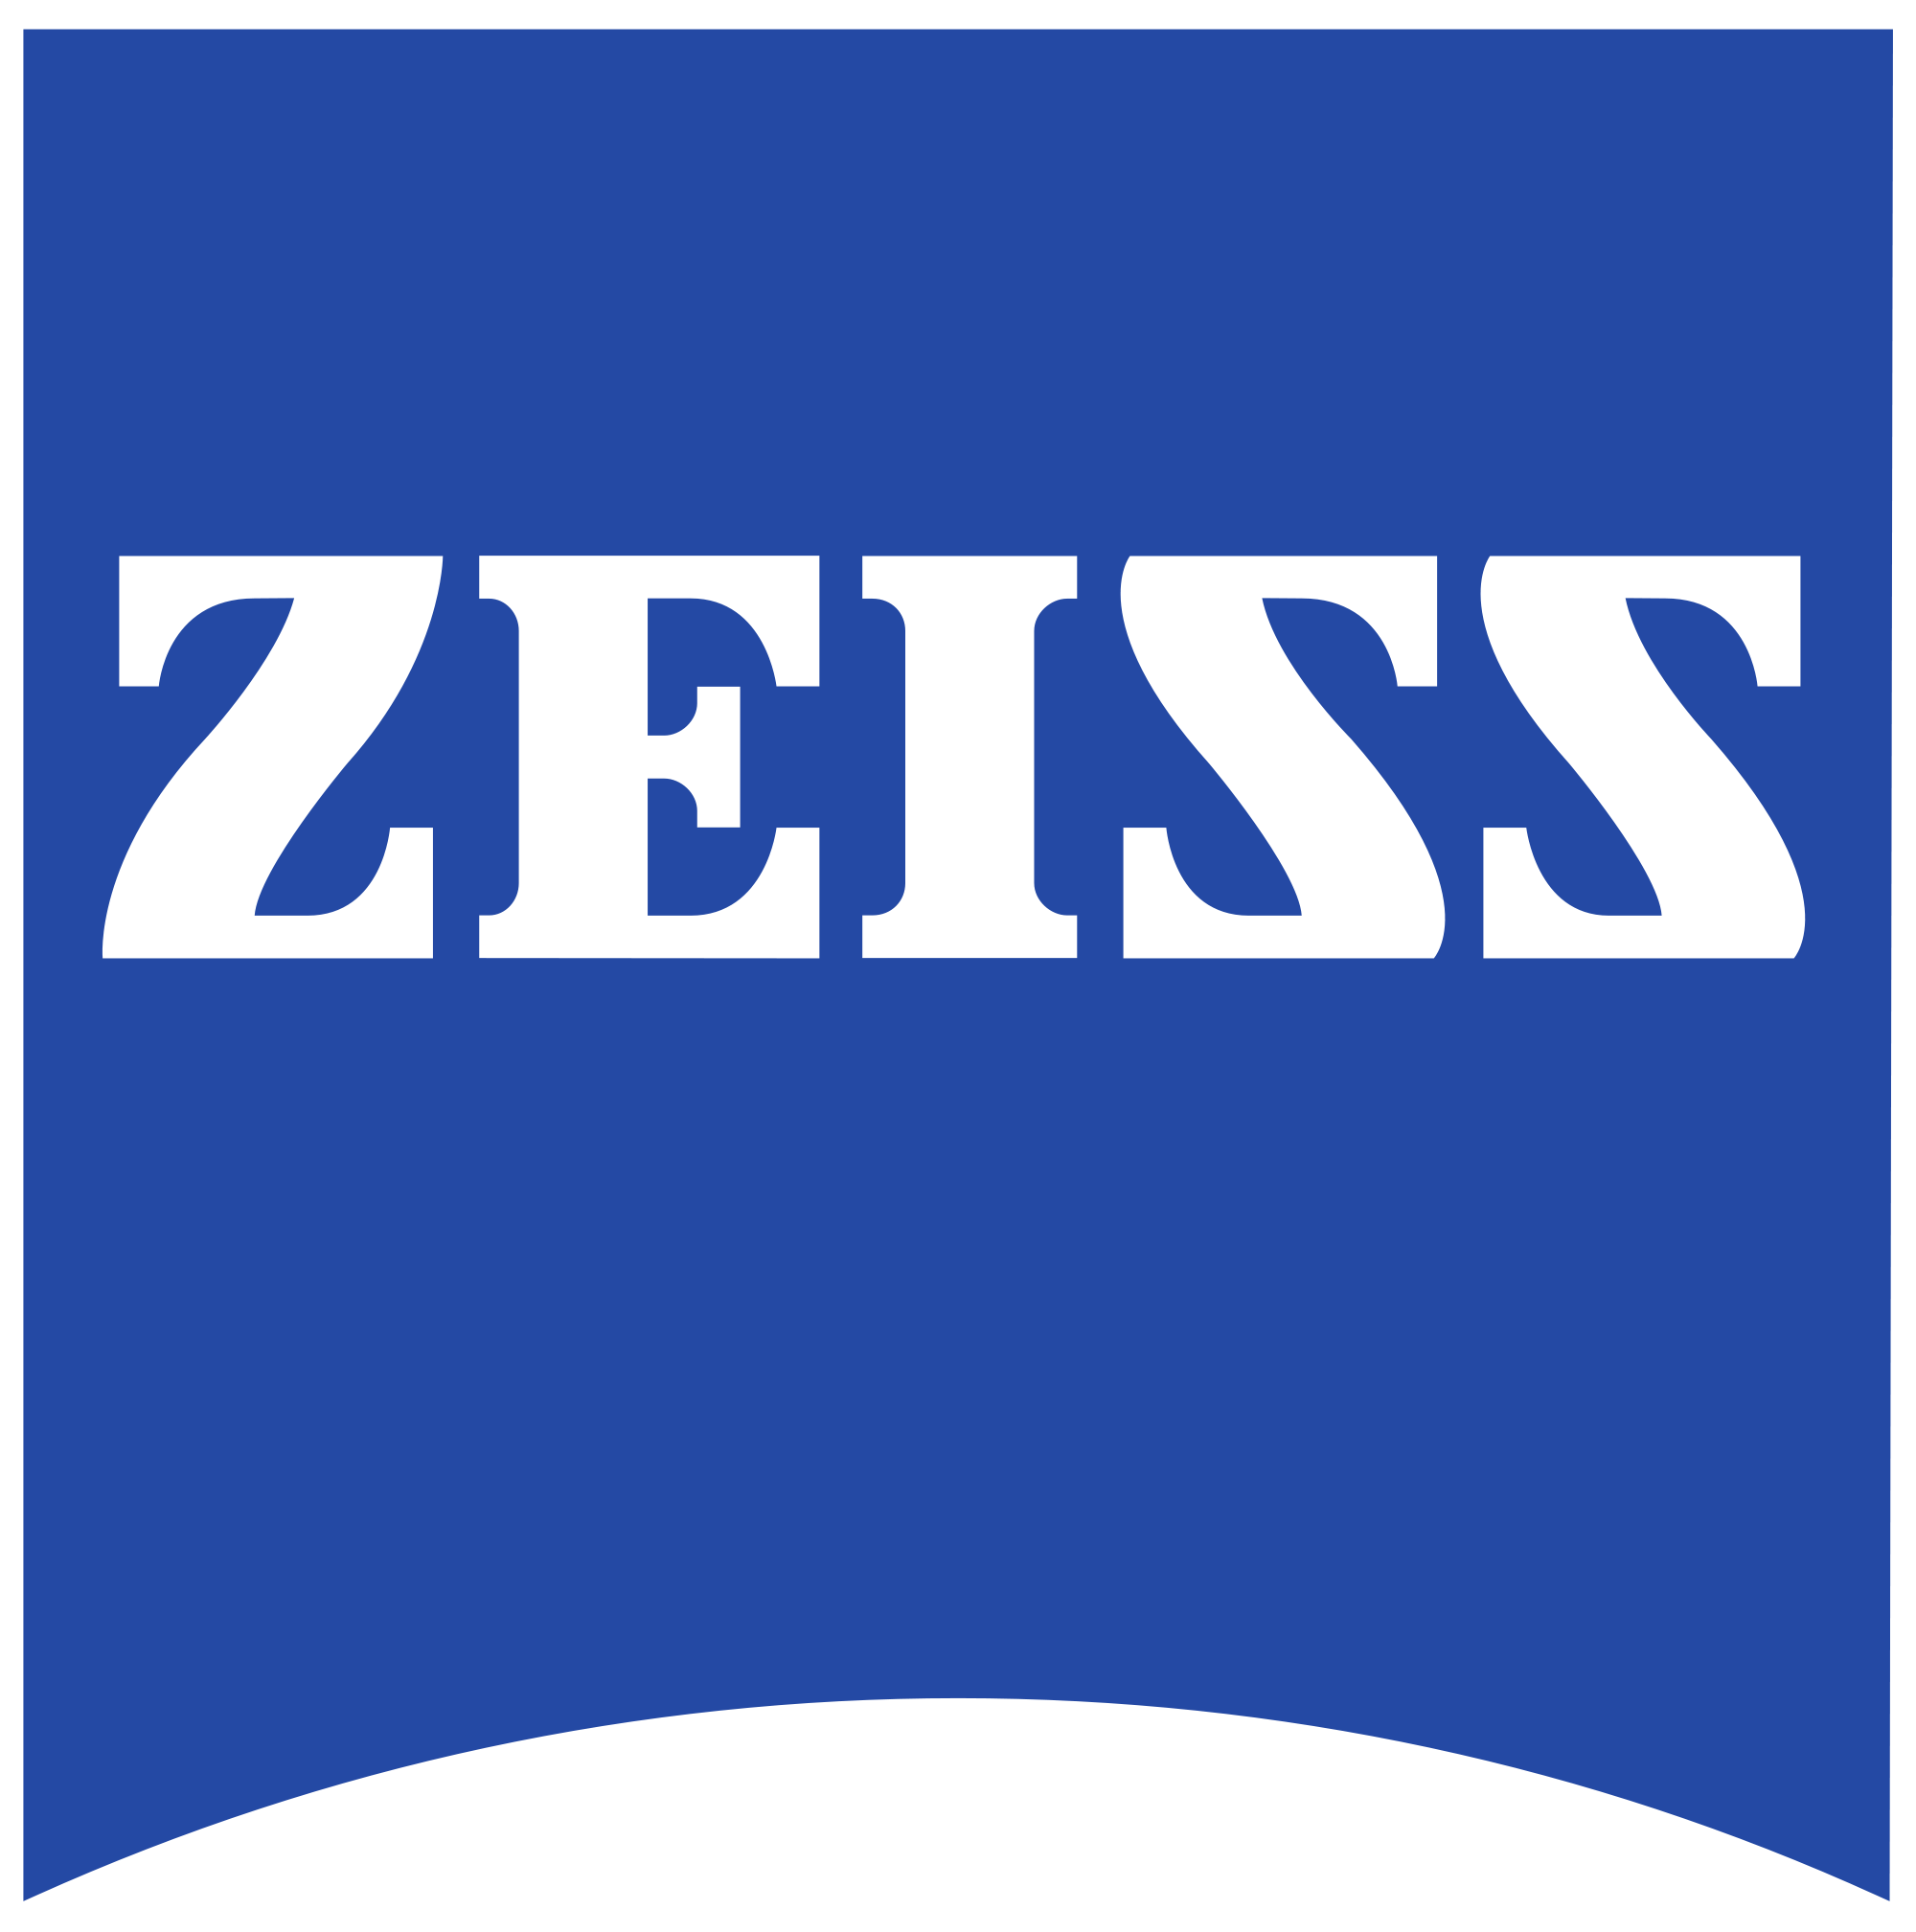 2000px-Zeiss_logo.svg.png